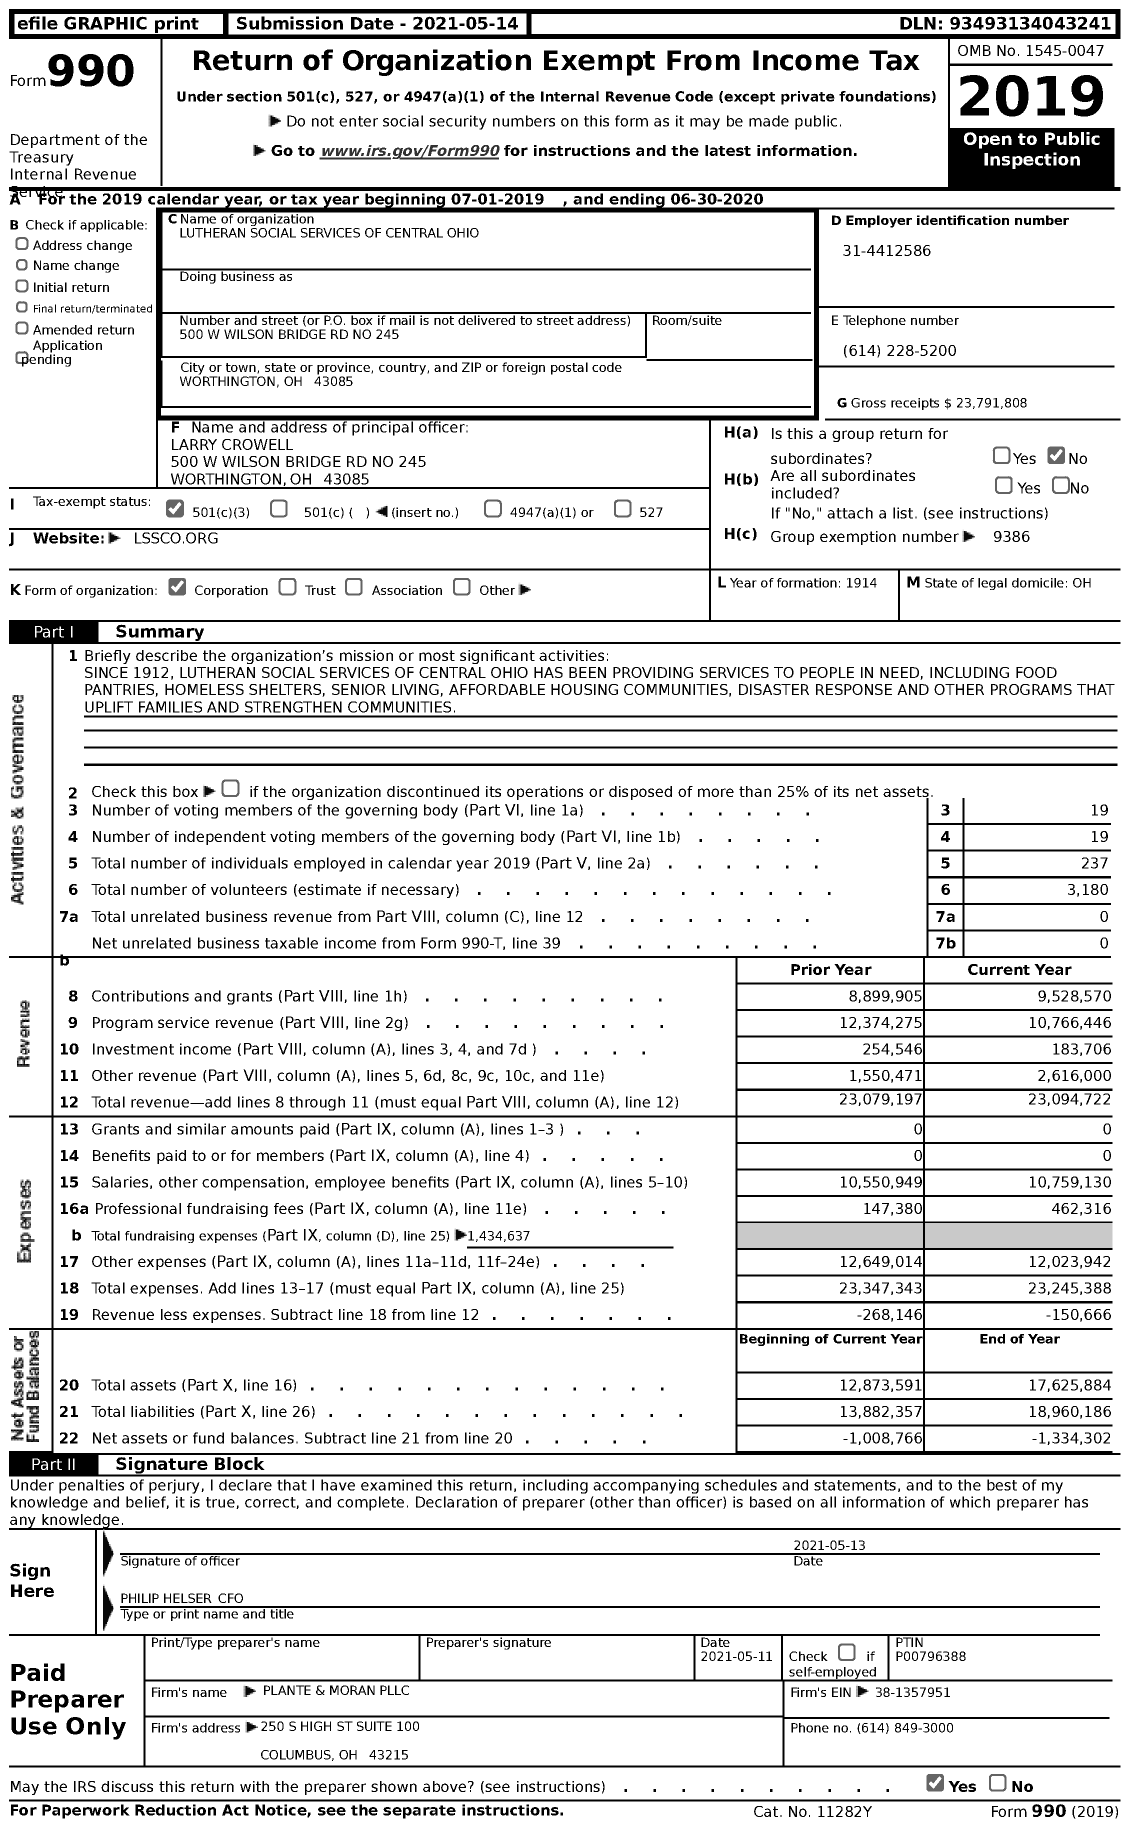 Image of first page of 2019 Form 990 for Lutheran Social Services of Central Ohio (LSS)